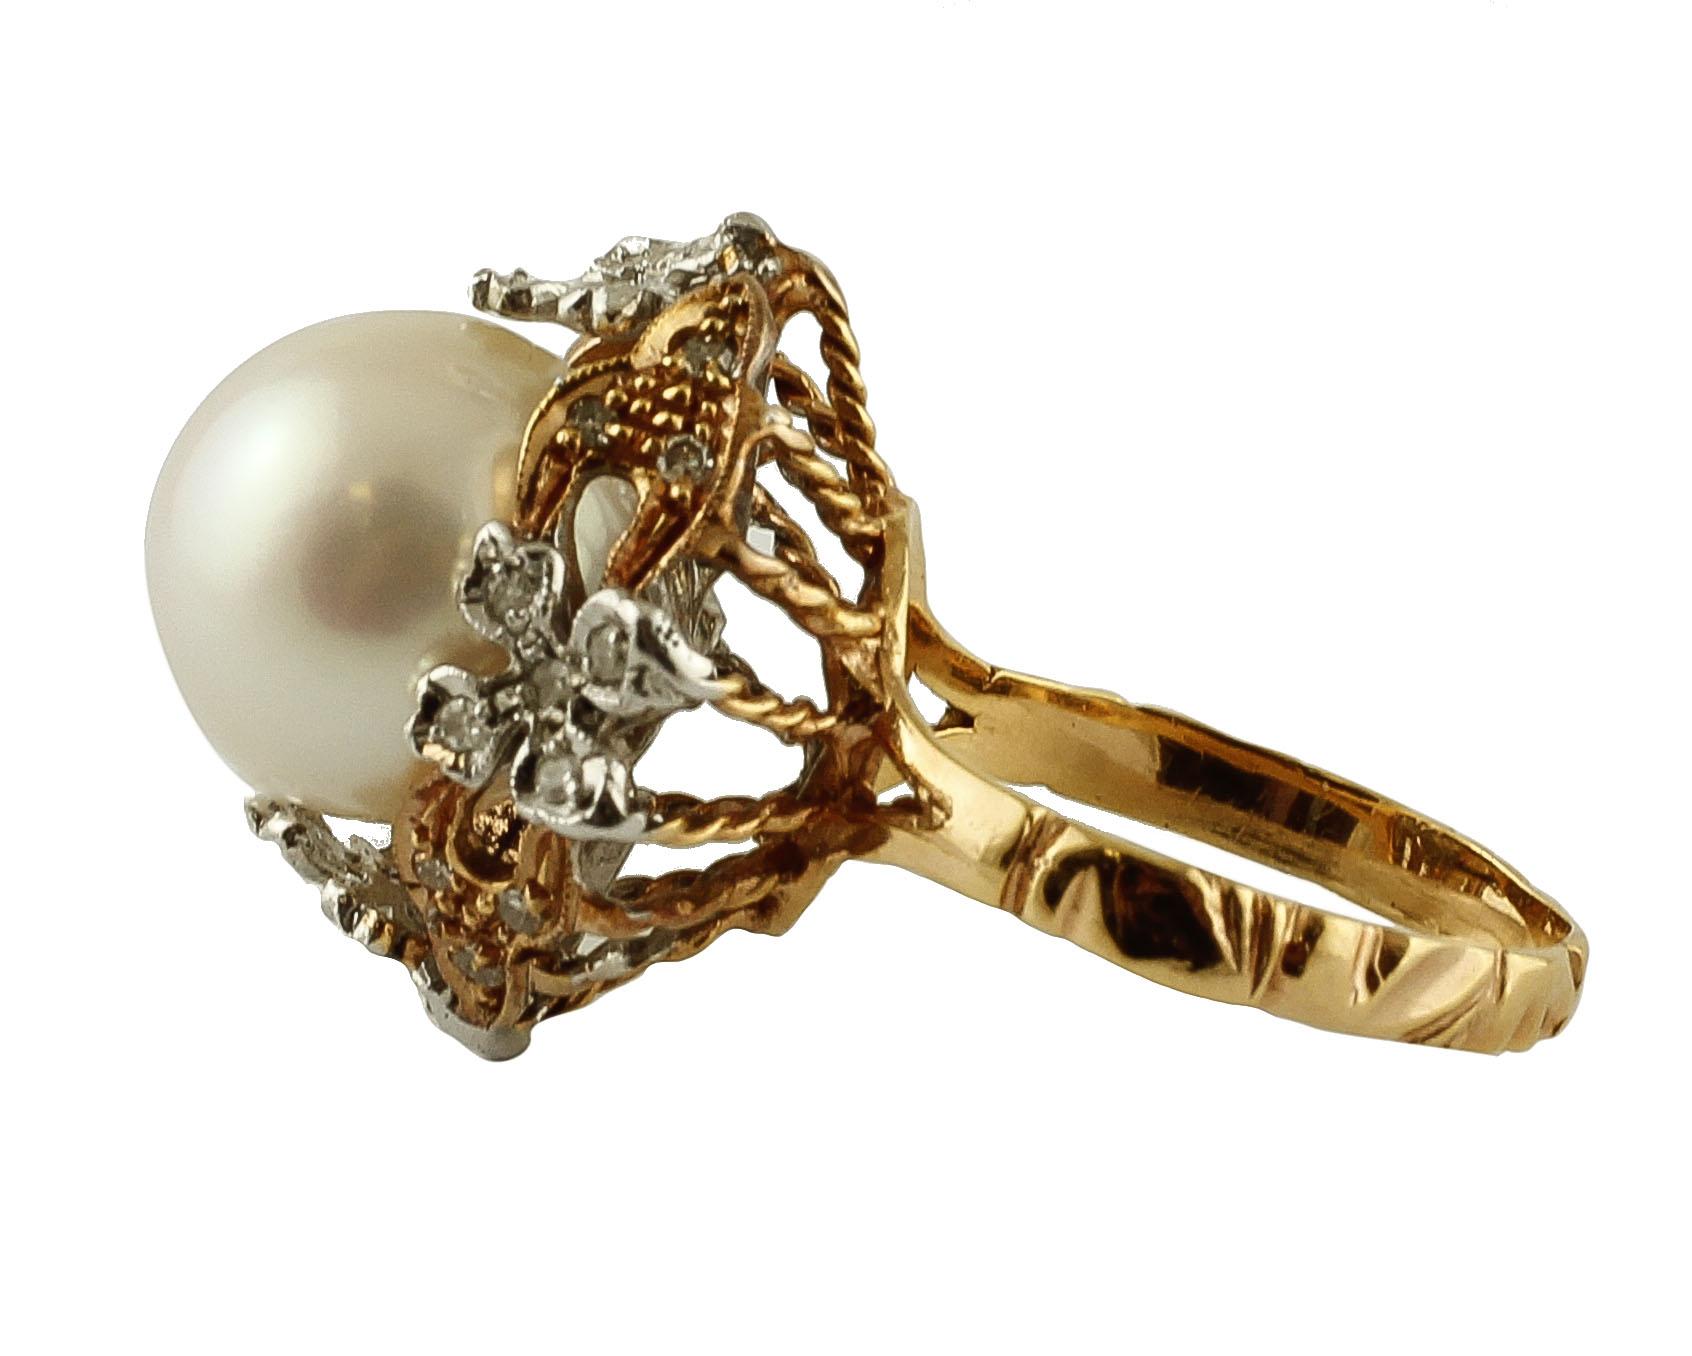 Retro Pearl ring realized in 14k rose gold, mounted with a central south sea pearl (13mm) surrounded by flowery details in white and rose gold studded with diamonds. 
This ring is totally handmade by Italian master goldsmiths
Diamonds 0.54 ct
Pearl